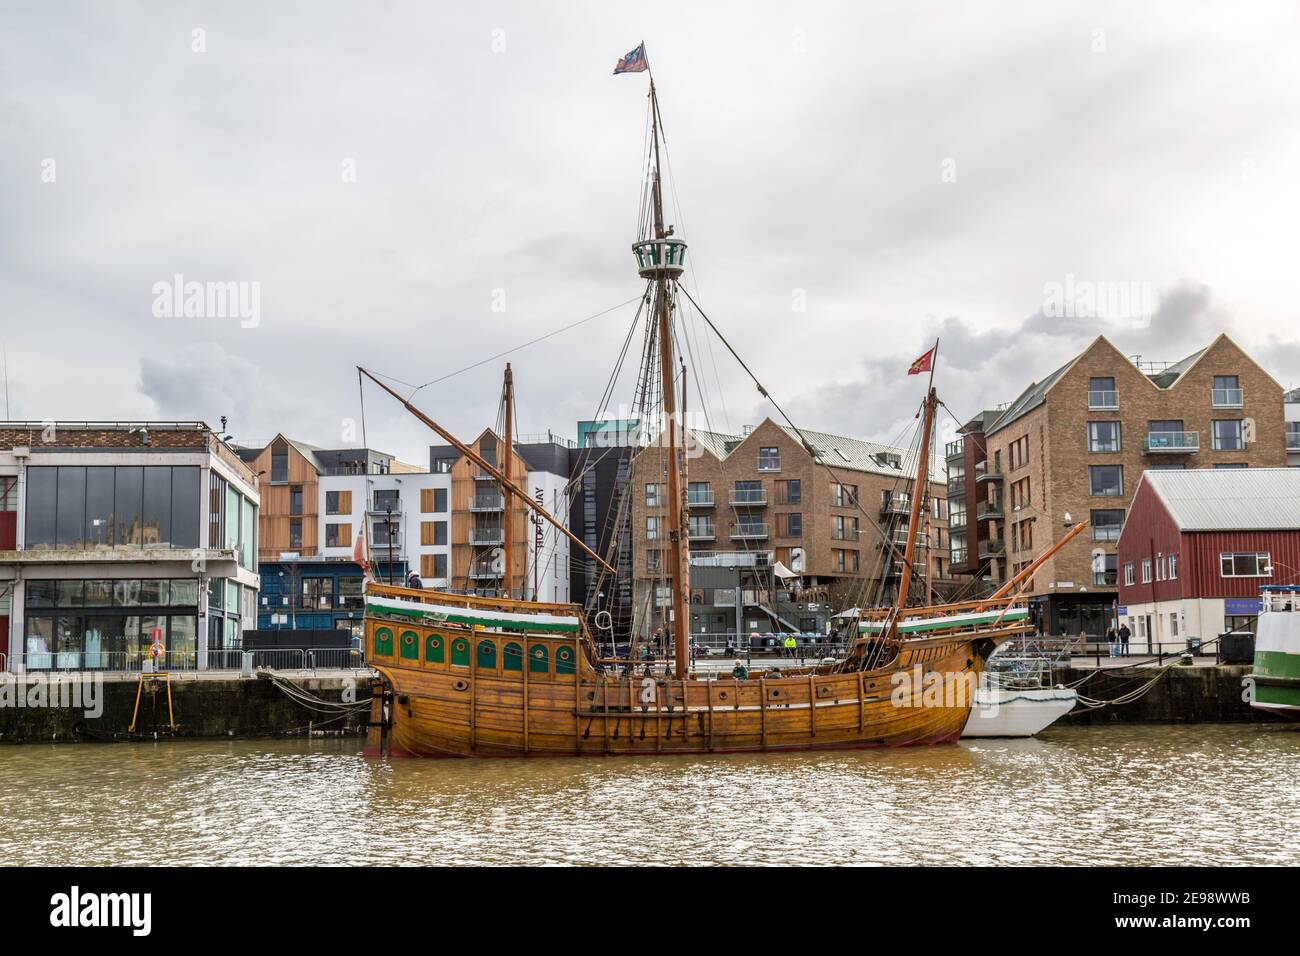 The 'Matthew', a replica square rigged sailing ship moored on the River Avon in Bristol. Built in 1994. Stock Photo